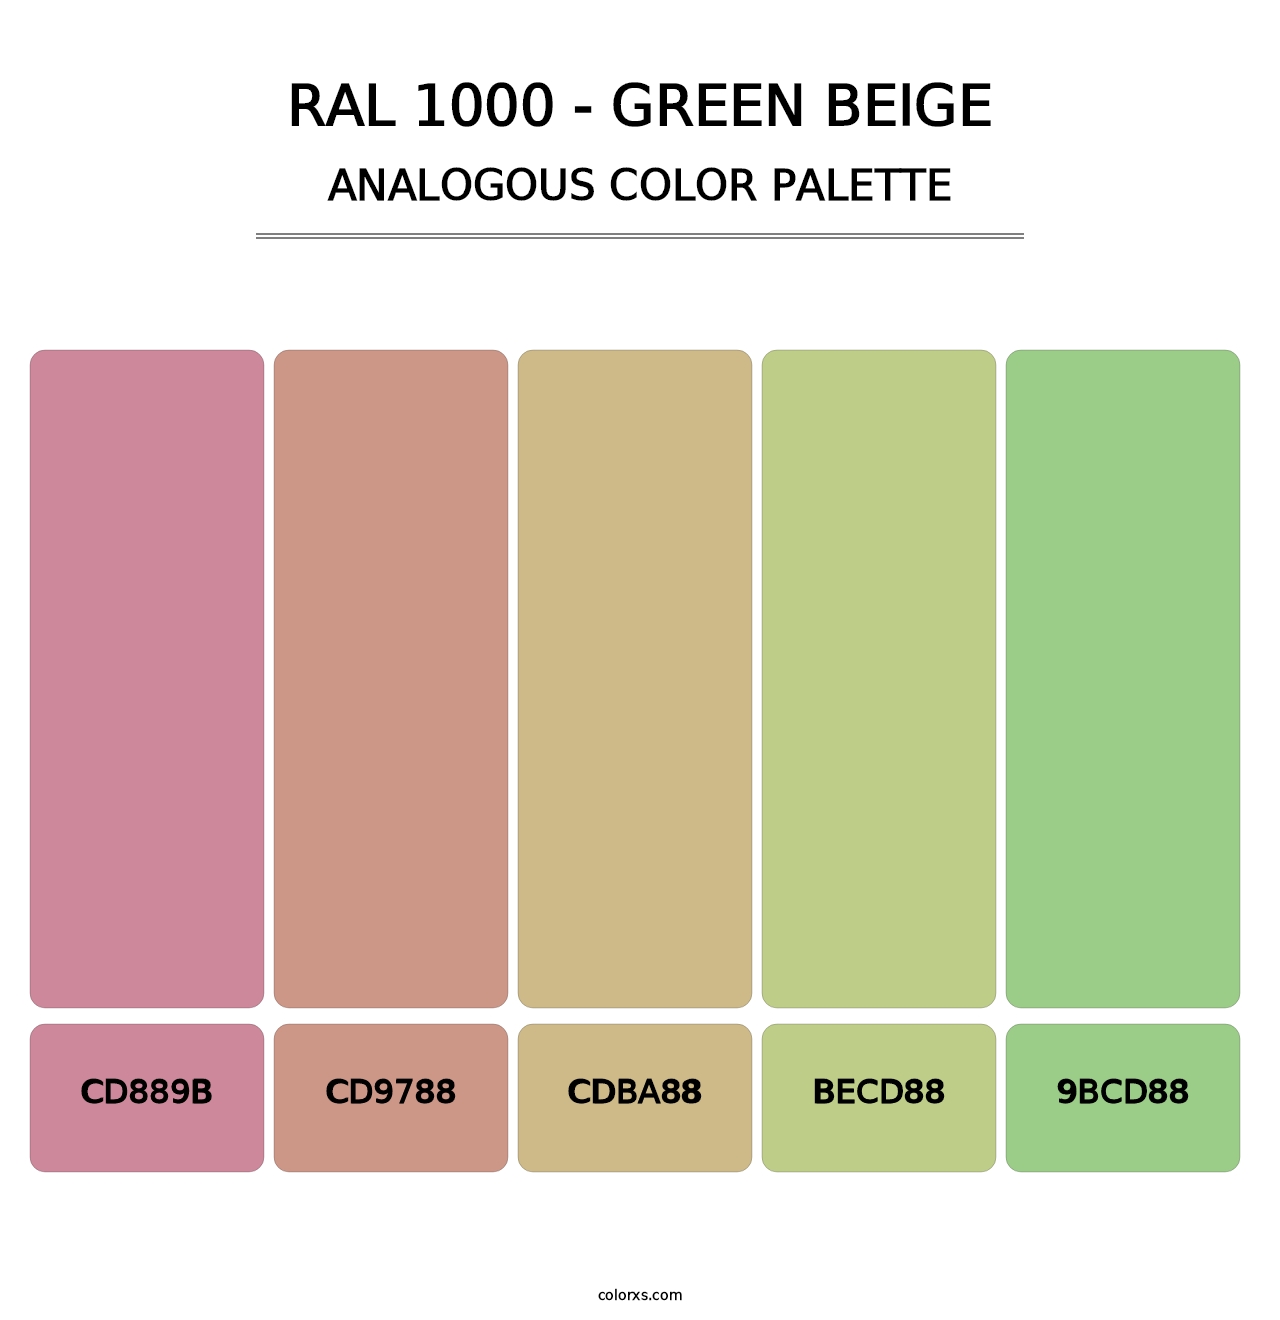 RAL 1000 - Green Beige - Analogous Color Palette